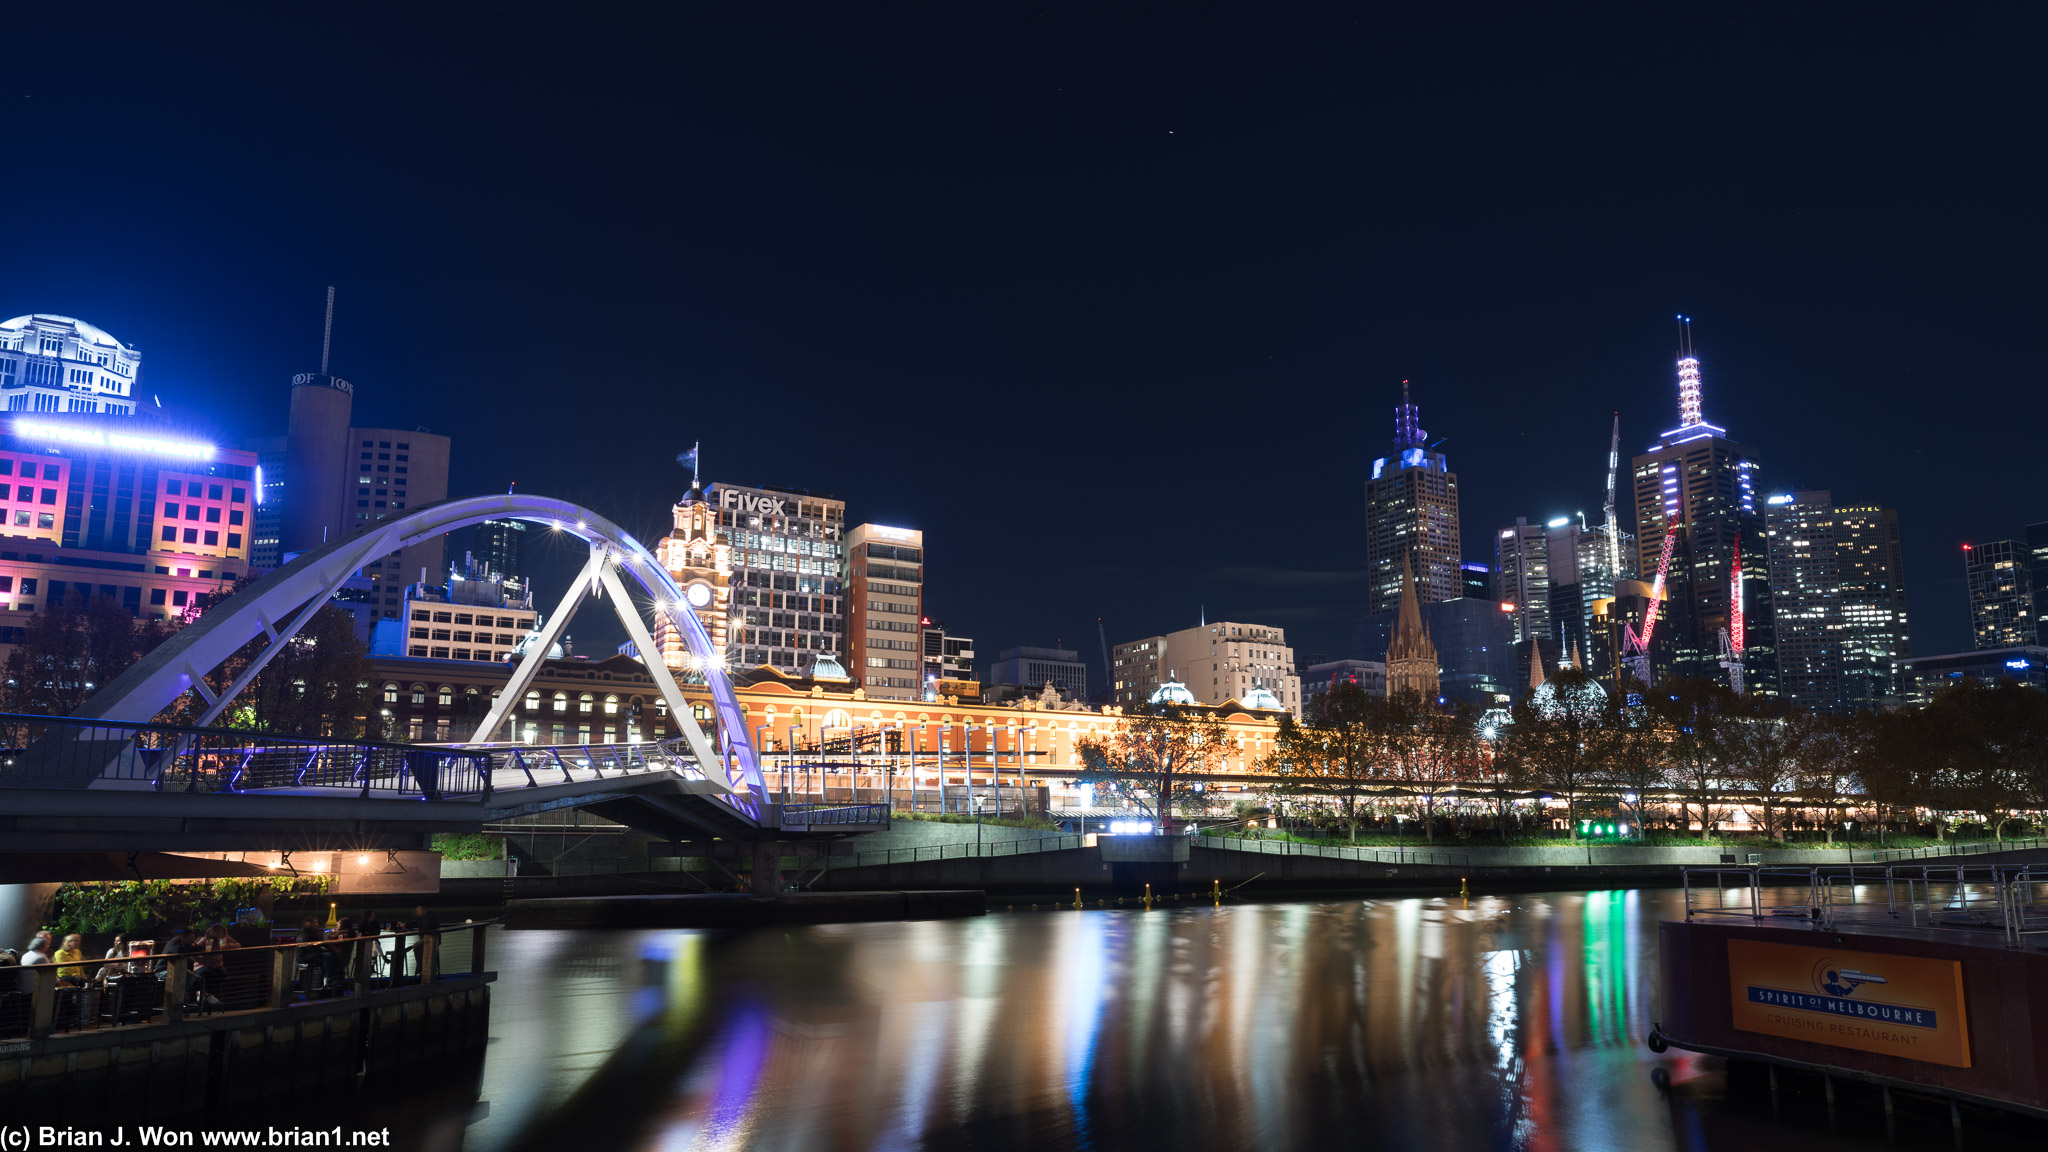 The Yarra River.